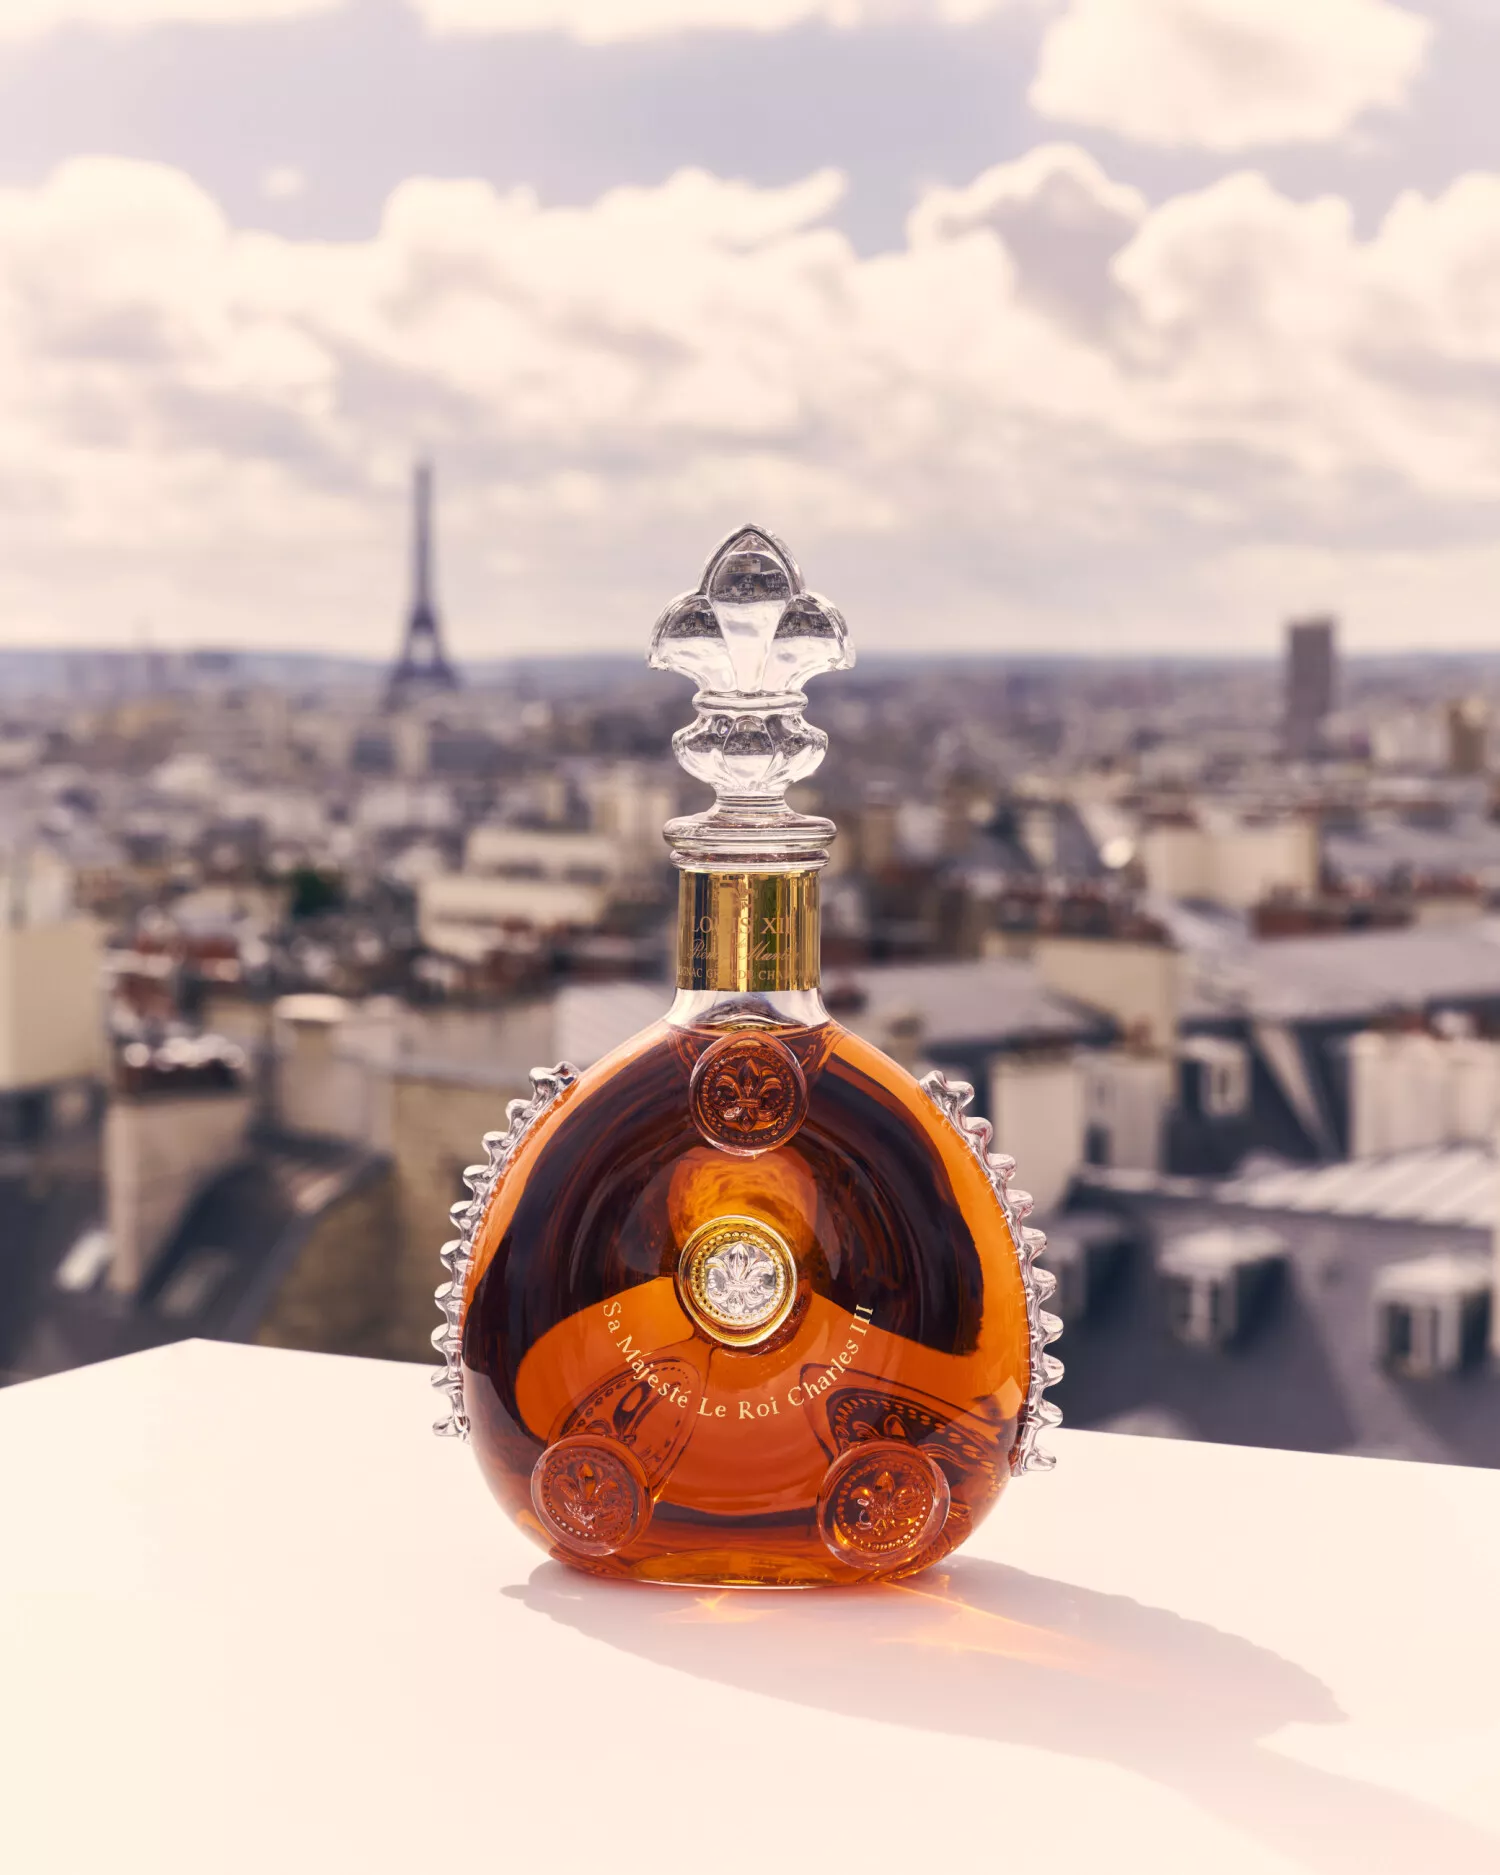 LOUIS XIII, THE KING OF COGNAC, IN HONOR OF HIS MAJESTY THE KING CHARLES III